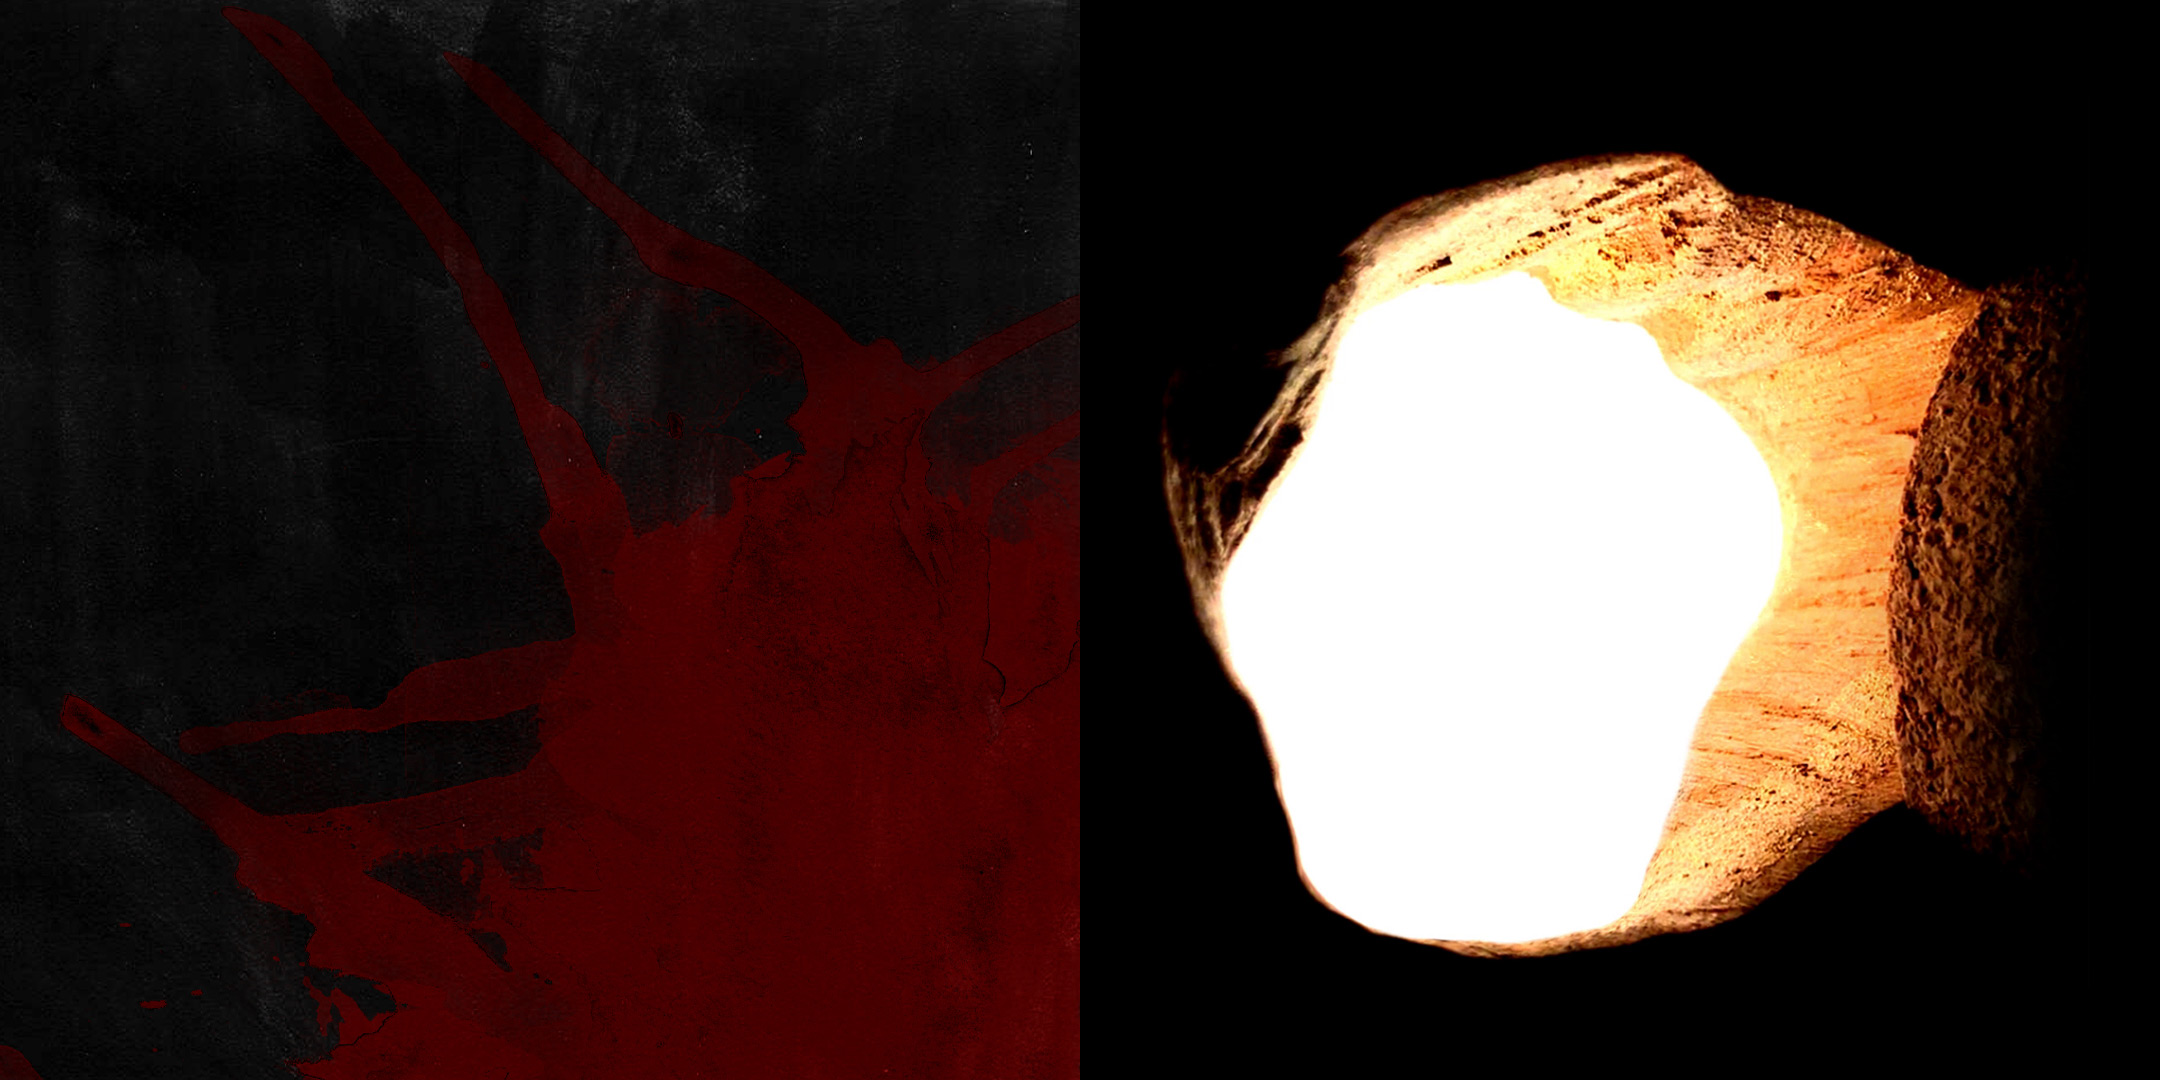 Digital artwork: Blood of Jesus, and the Empty Tomb